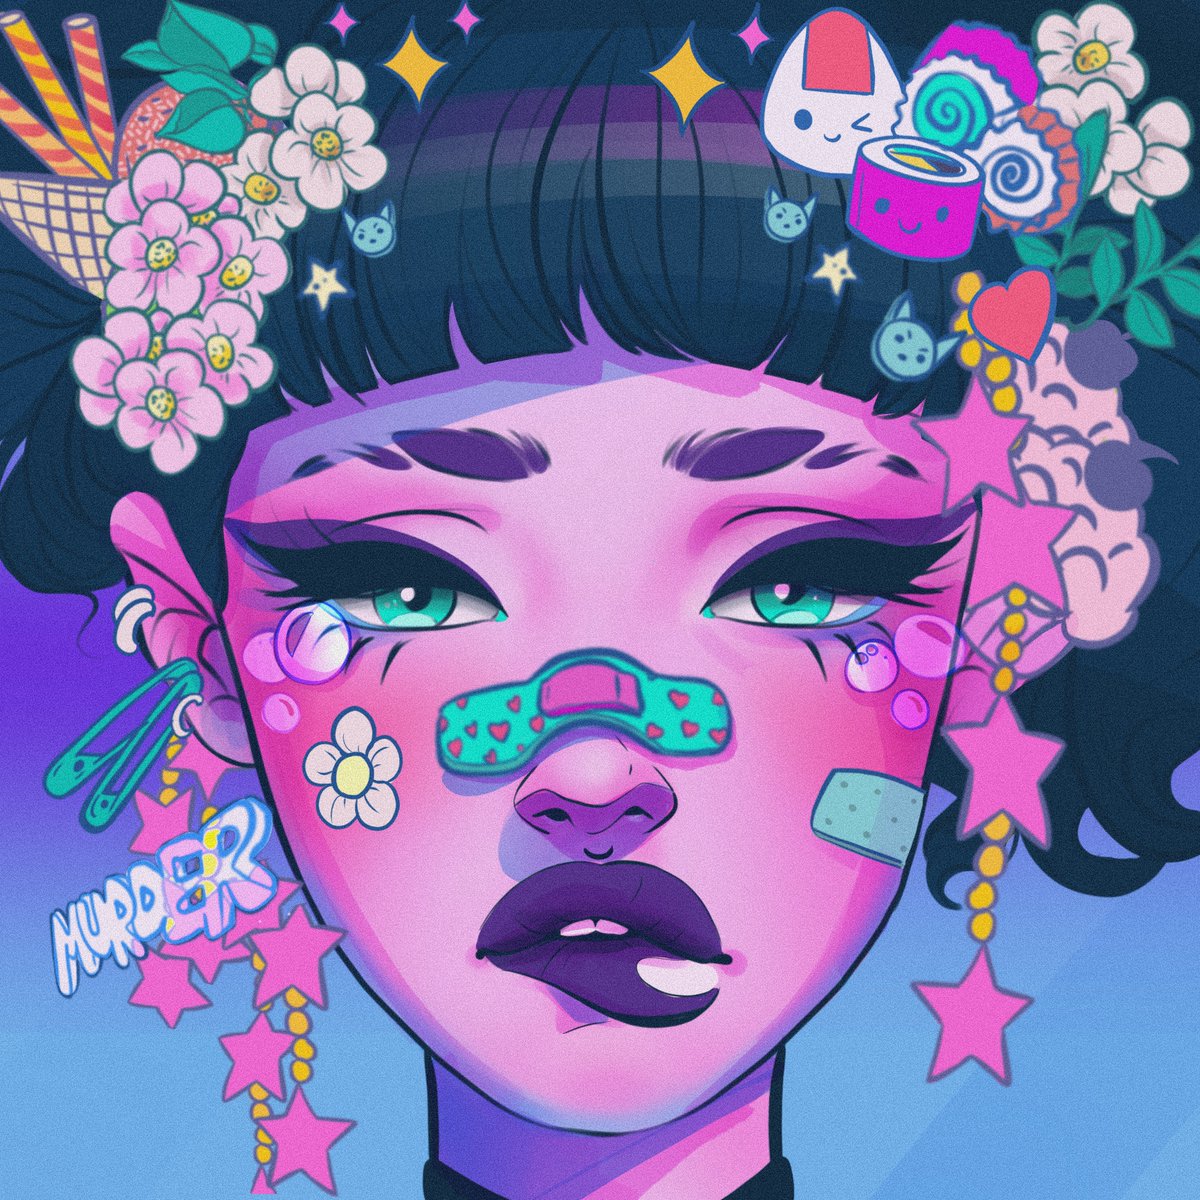 Just DROP ✨👸🏻😈✨ 'My Tears are Made of Pearls' Colorful Pink and Cool Stuff - Collection @opensea I think she is my fav of this collection 😁❤️😁 ✨0.12 $ETH opensea.io/assets/ethereu… #KatoKrew #KatoOgGo #OGCollective #WomeninNFTs #NFTdrop #NFTCommuinity #NFTartists #nftart